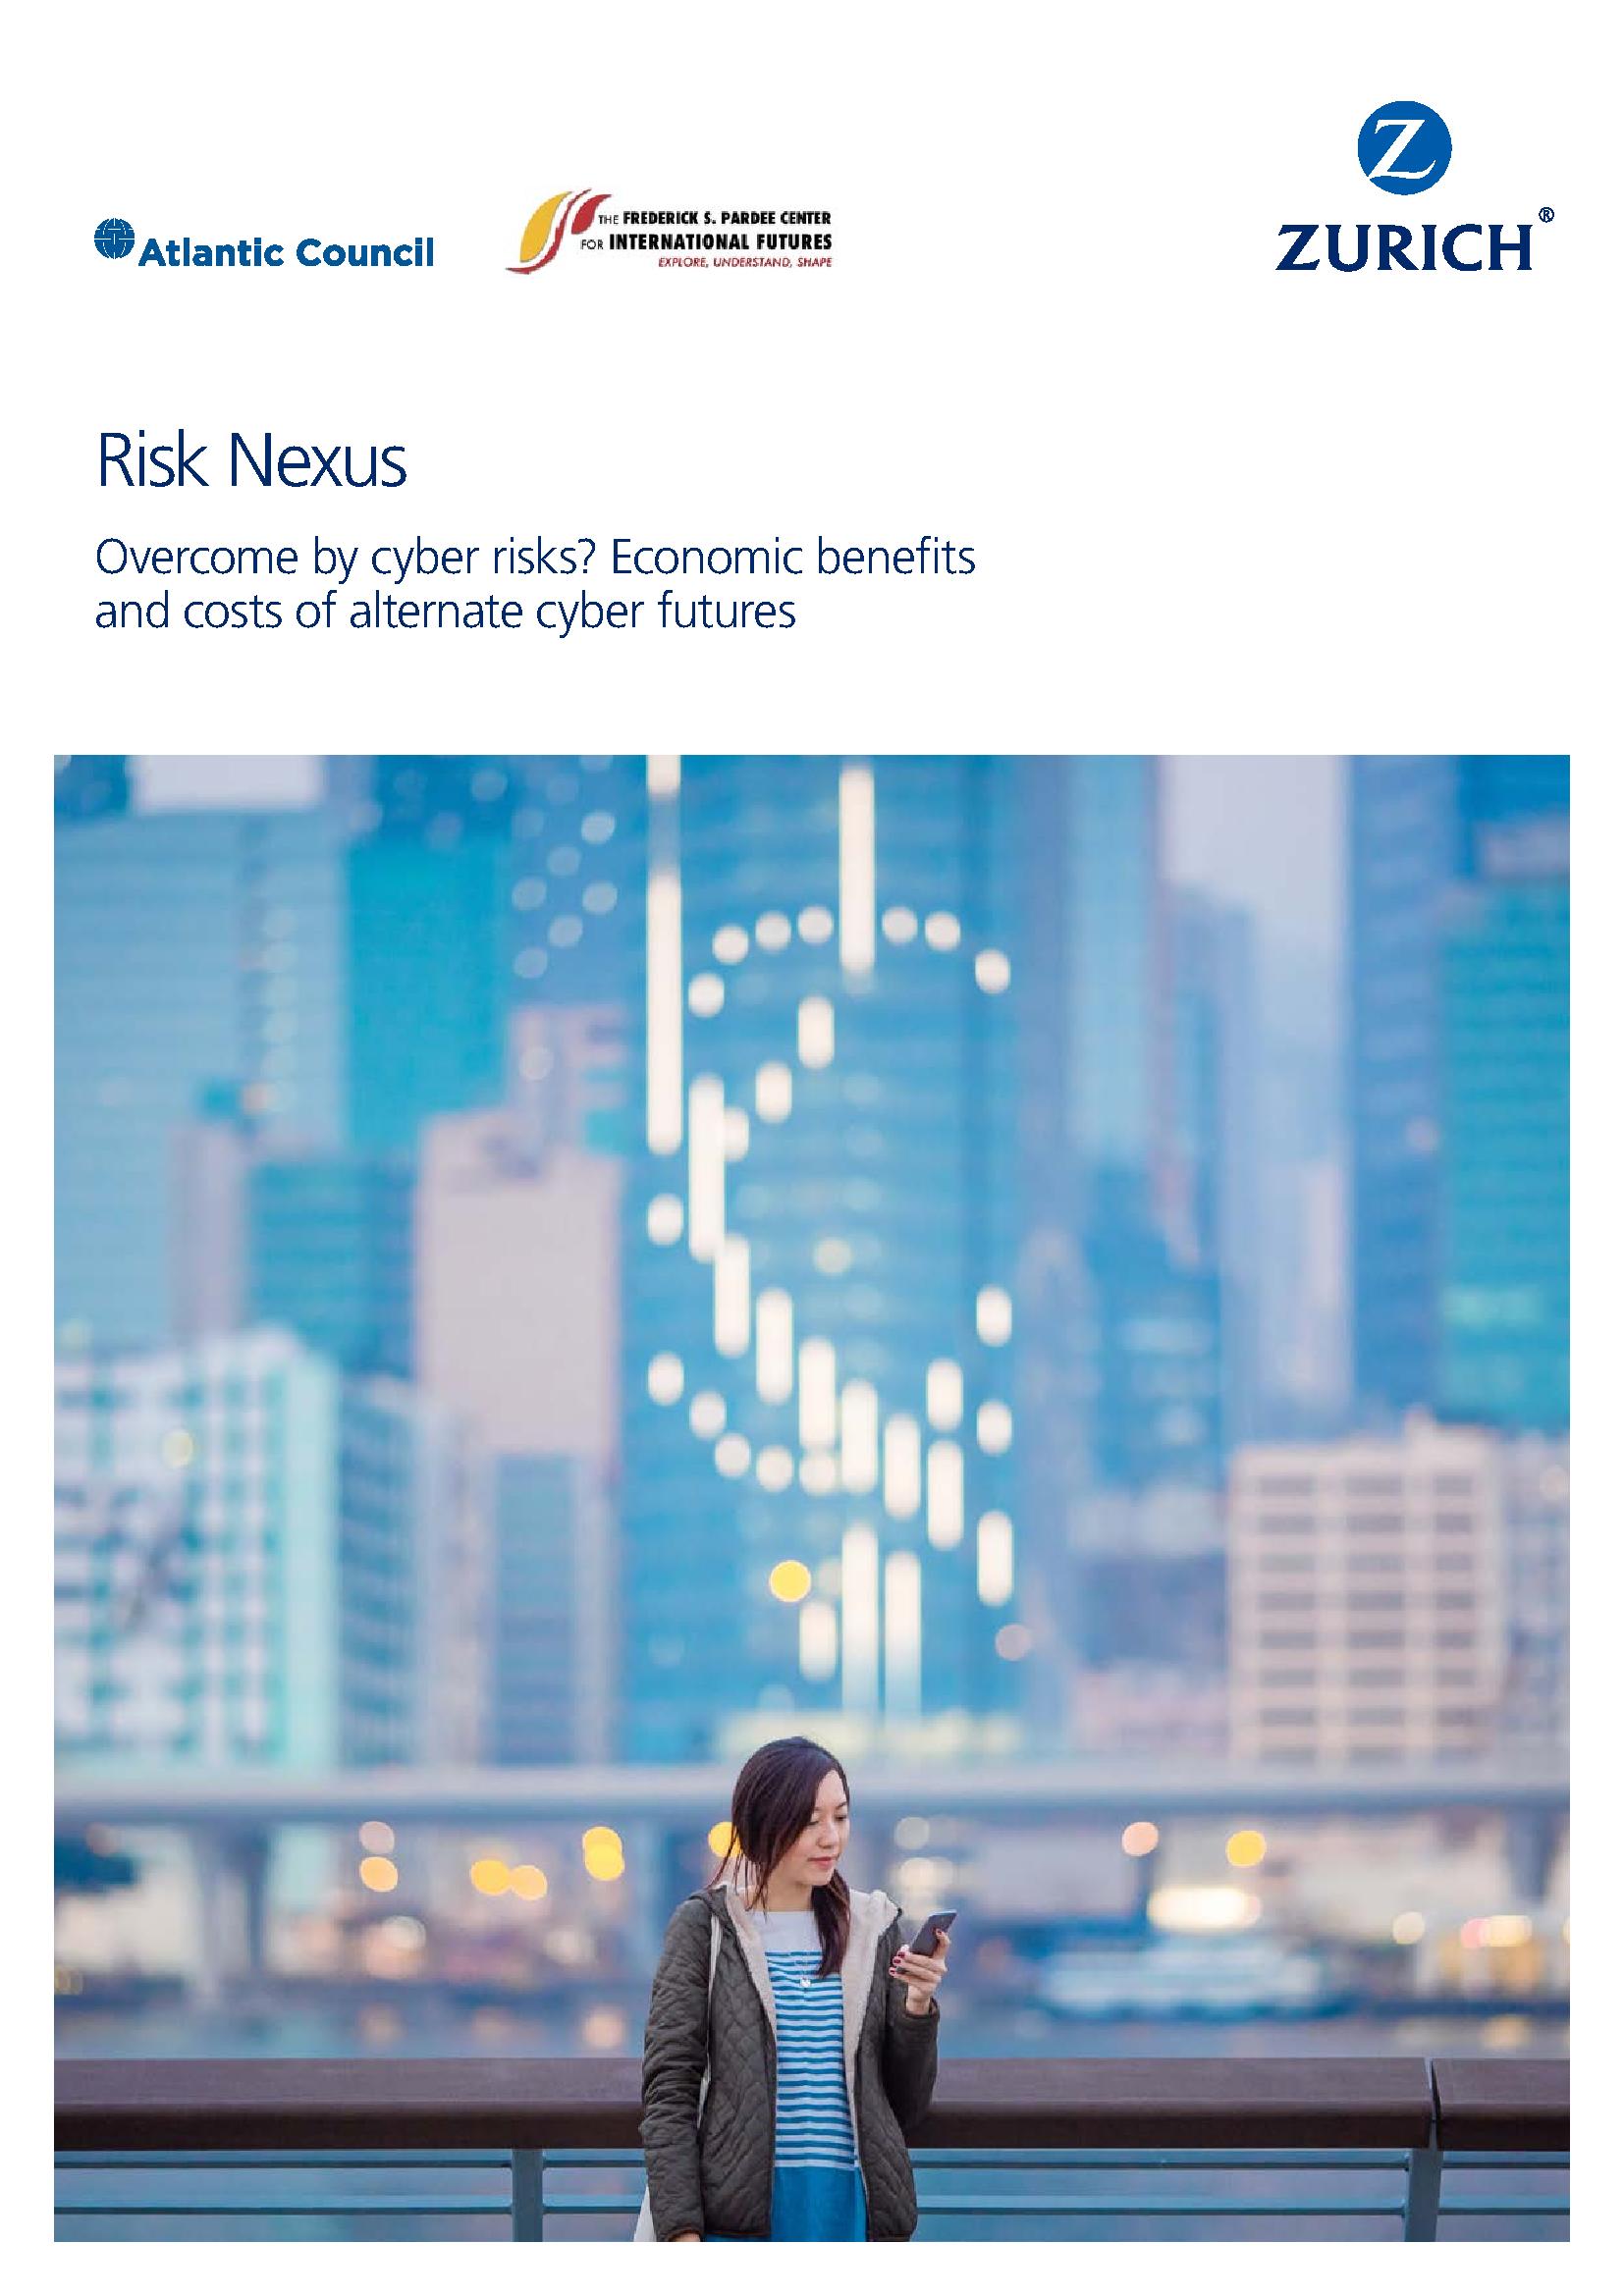 Risk Nexus Overcome by cyber risks? Economic benefits and costs of alternate cyber futures